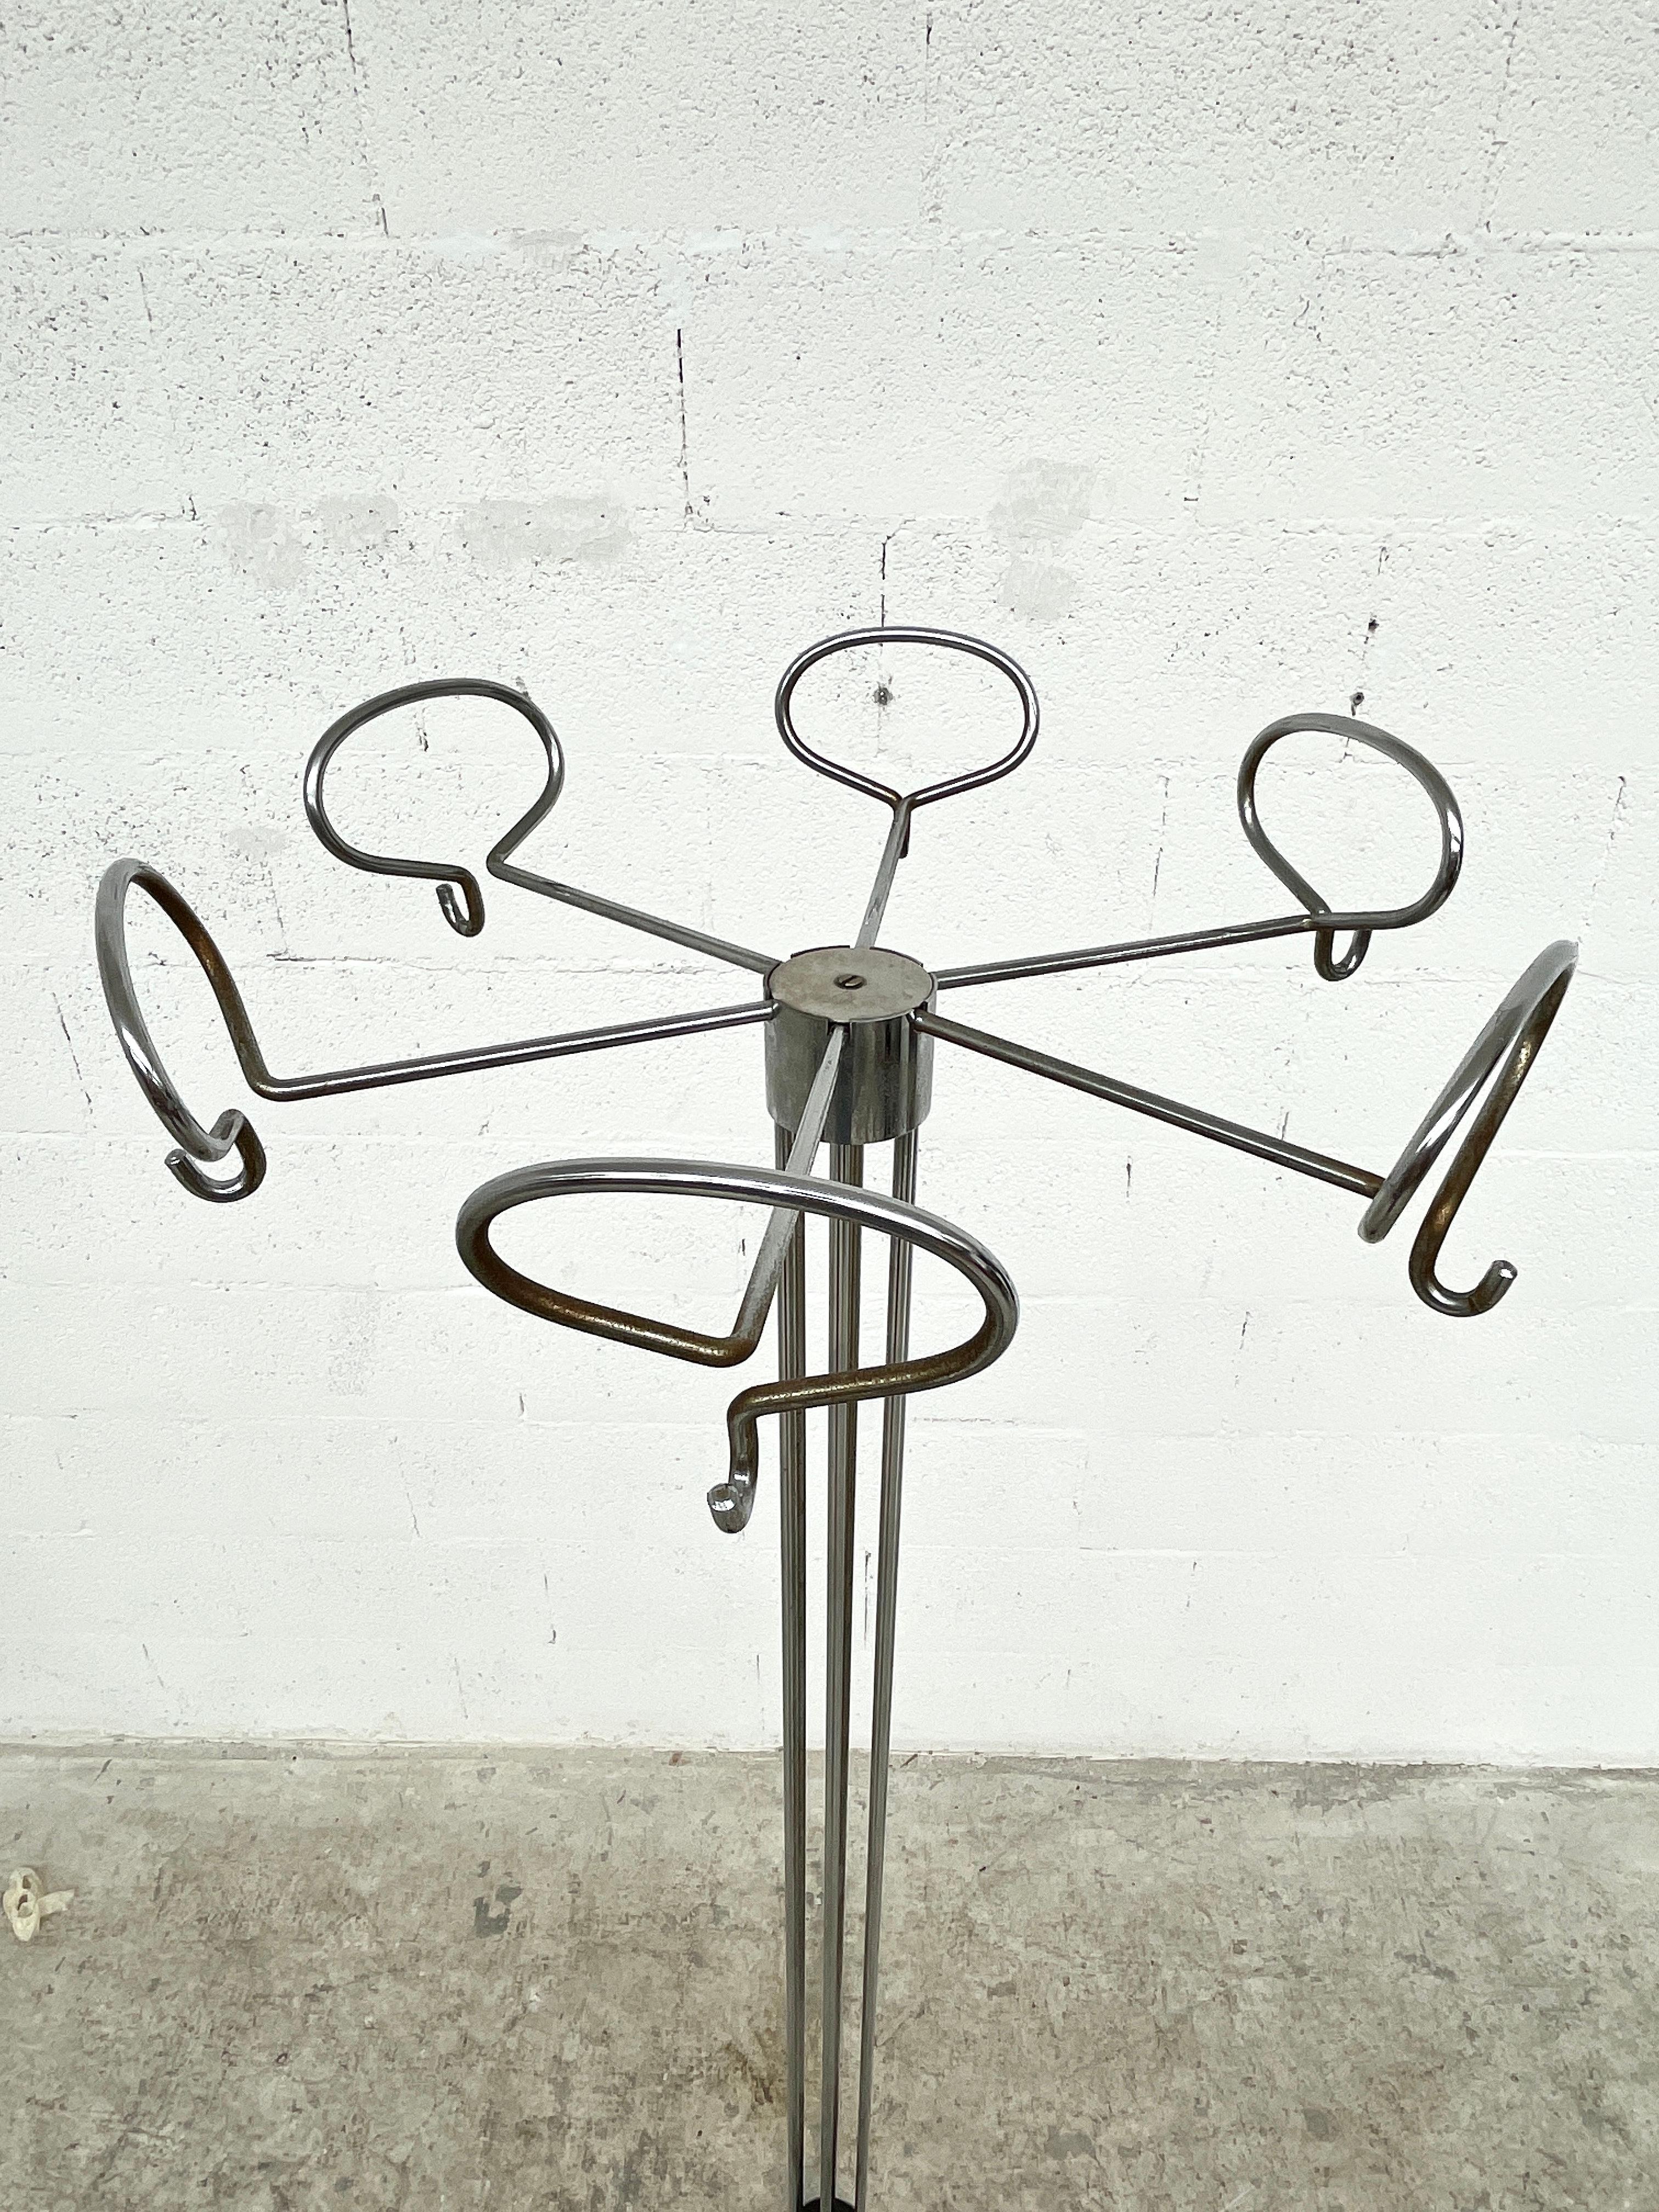 Italian Chromed Metal Clothes Hanger by Isao Hosoe for Valenti 70s For Sale